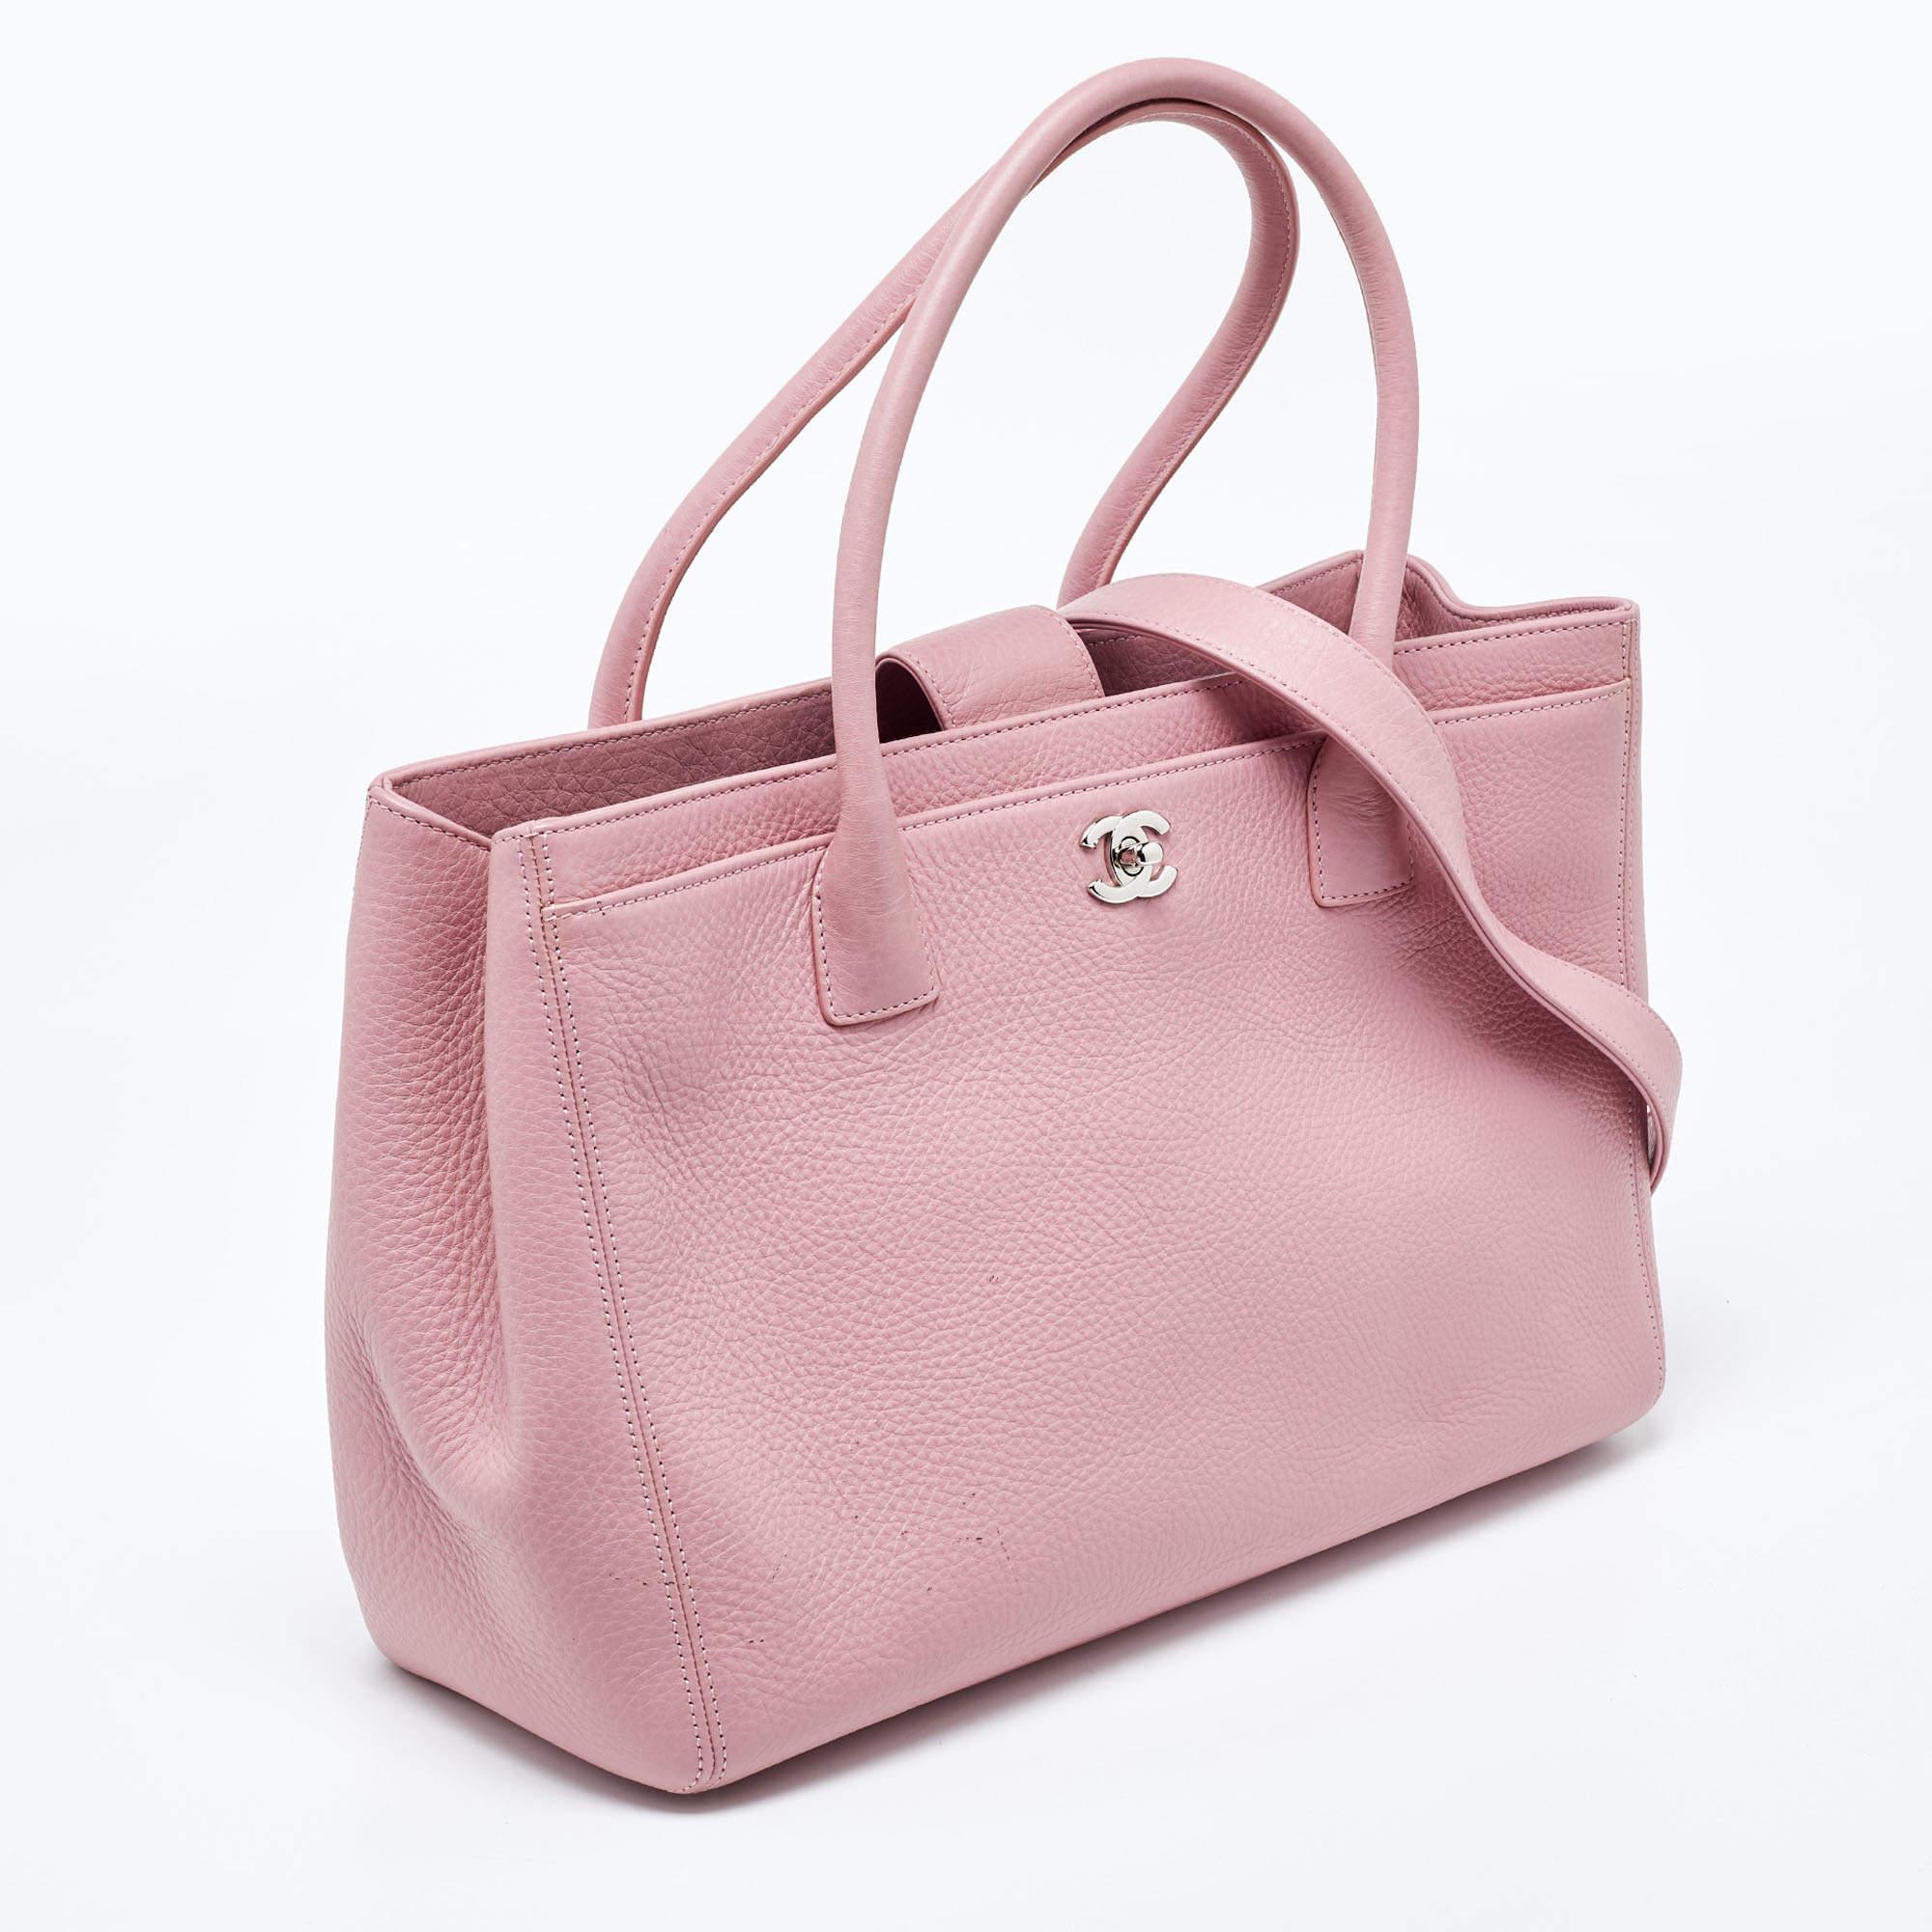 This Cerf tote from Chanel is a perfect blend of function and style. It features a leather construction enhanced with a metal CC logo on the front and dual top handles. It is equipped with a spacious interior that can easily hold your daily